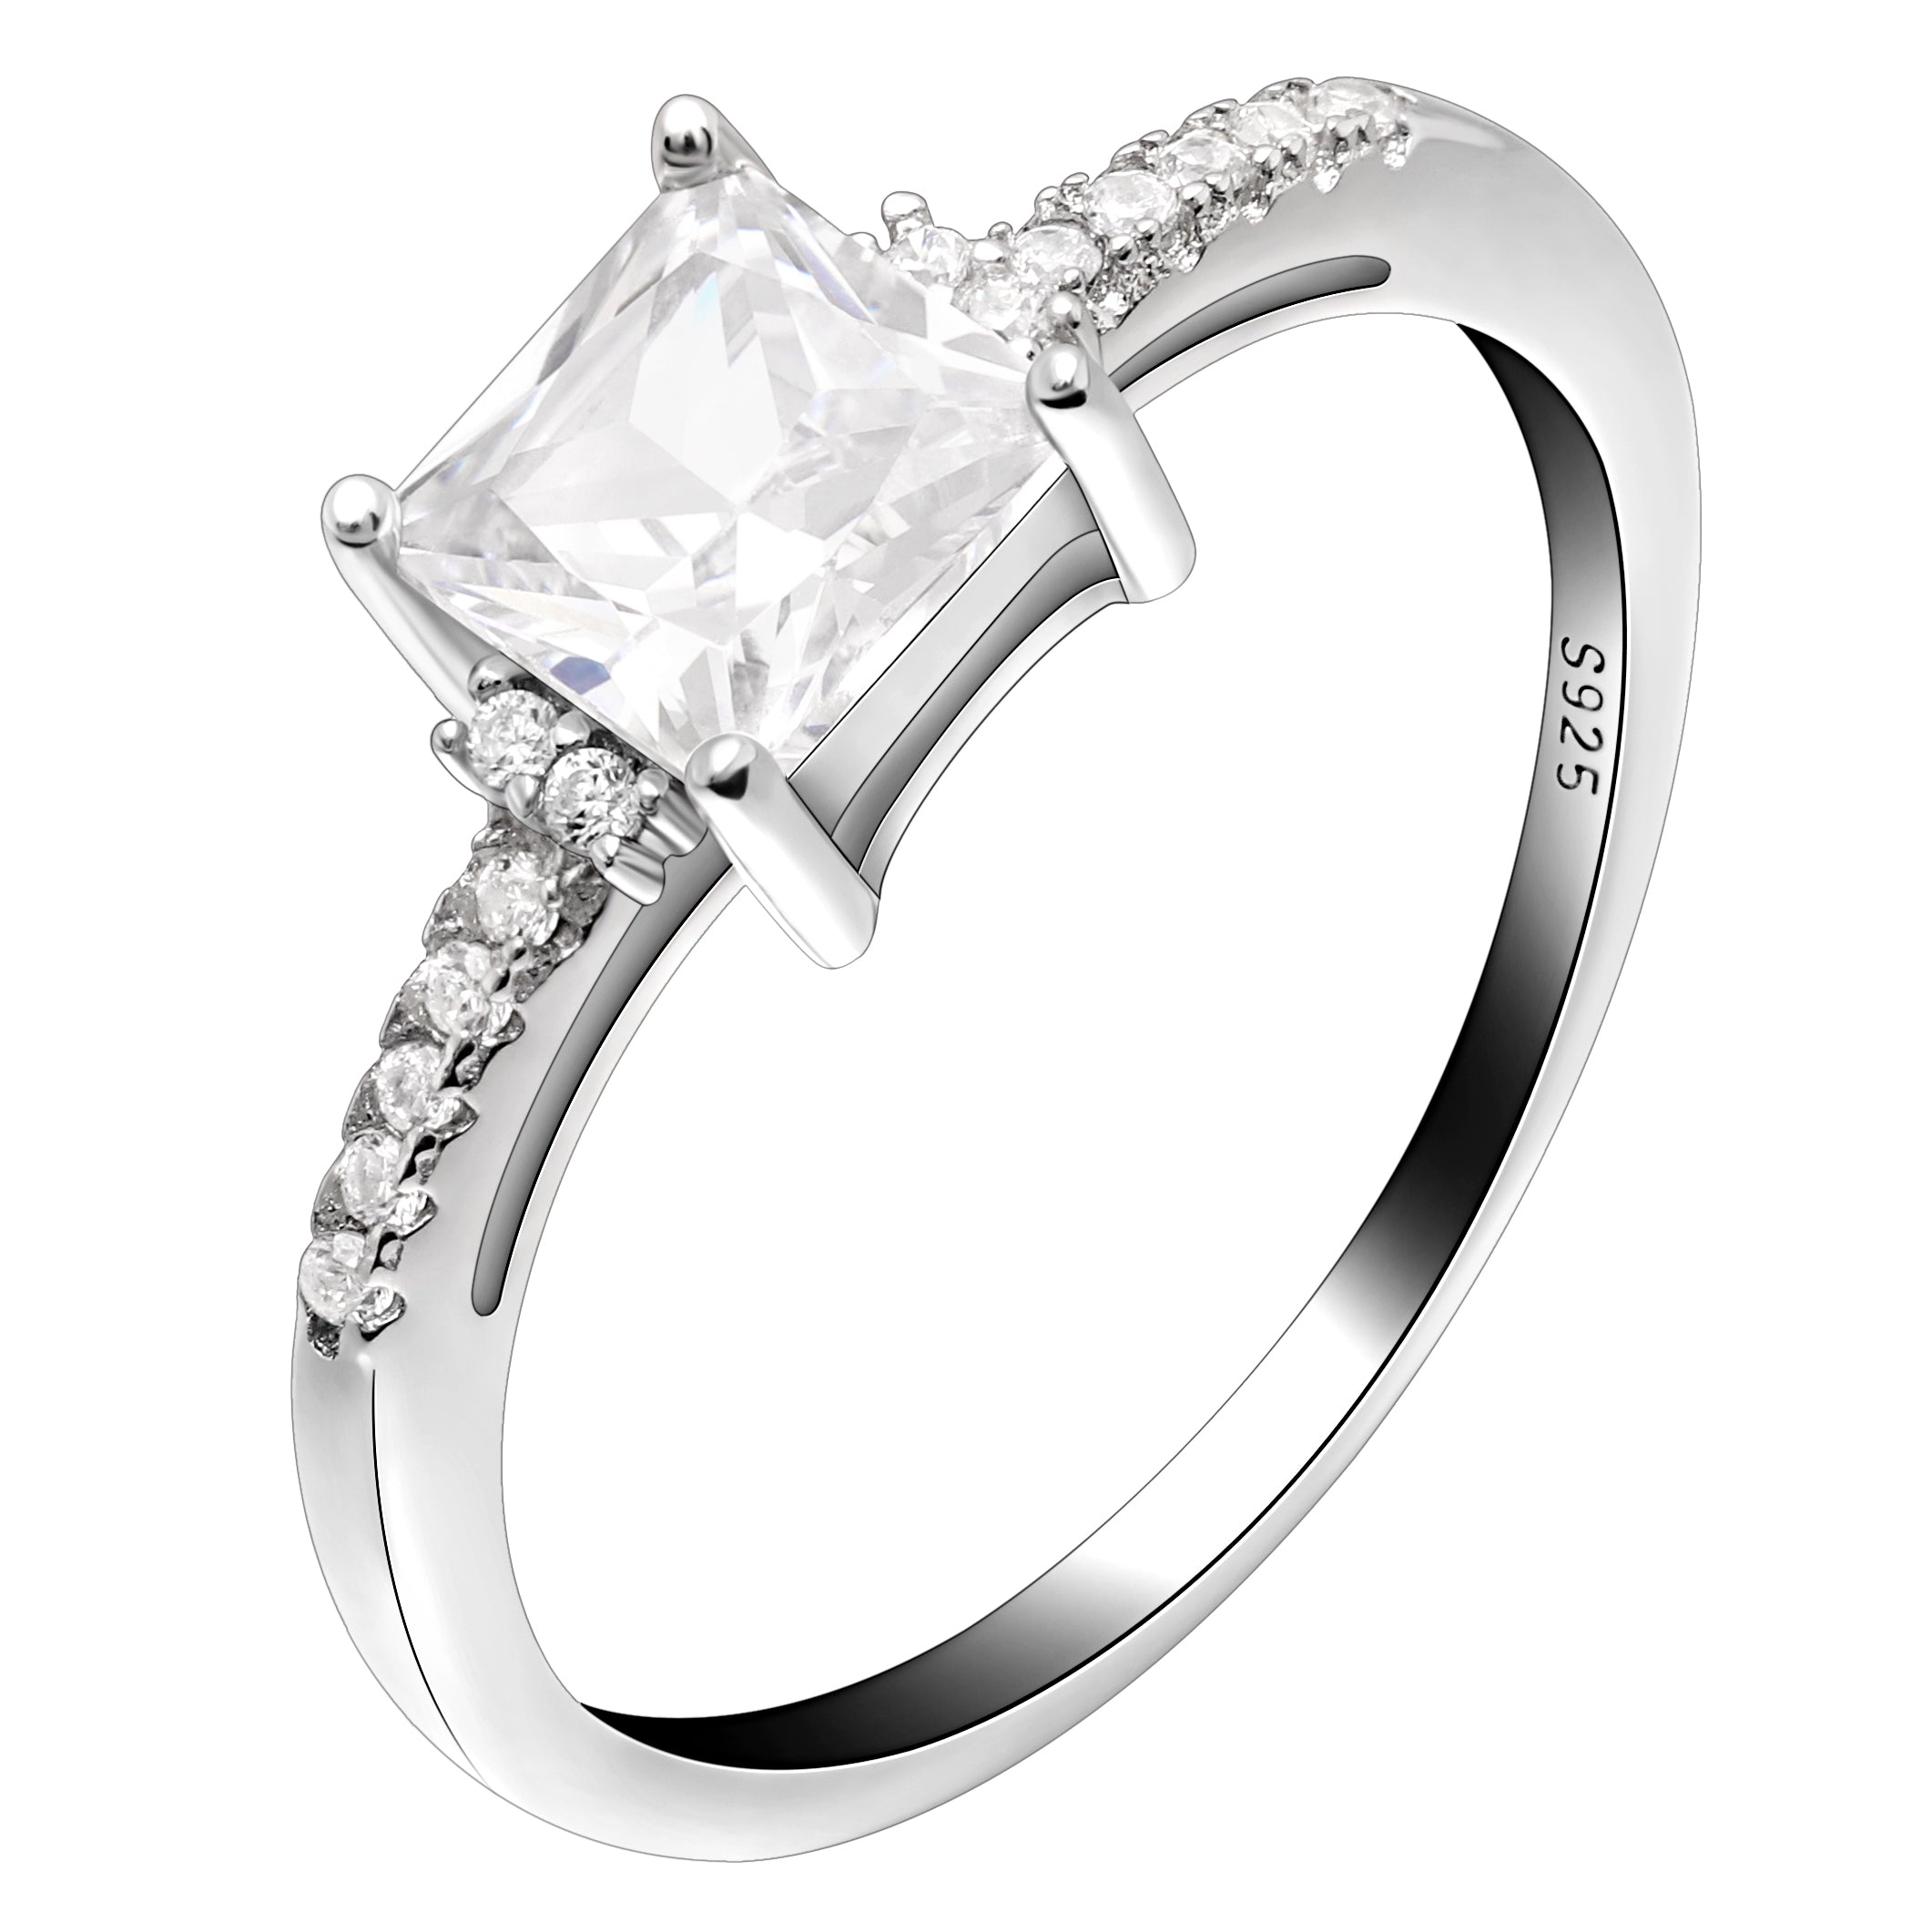 Morgan Engagement Ring Princess Cz Sterling Silver Women Ginger Lyne Collection - 5